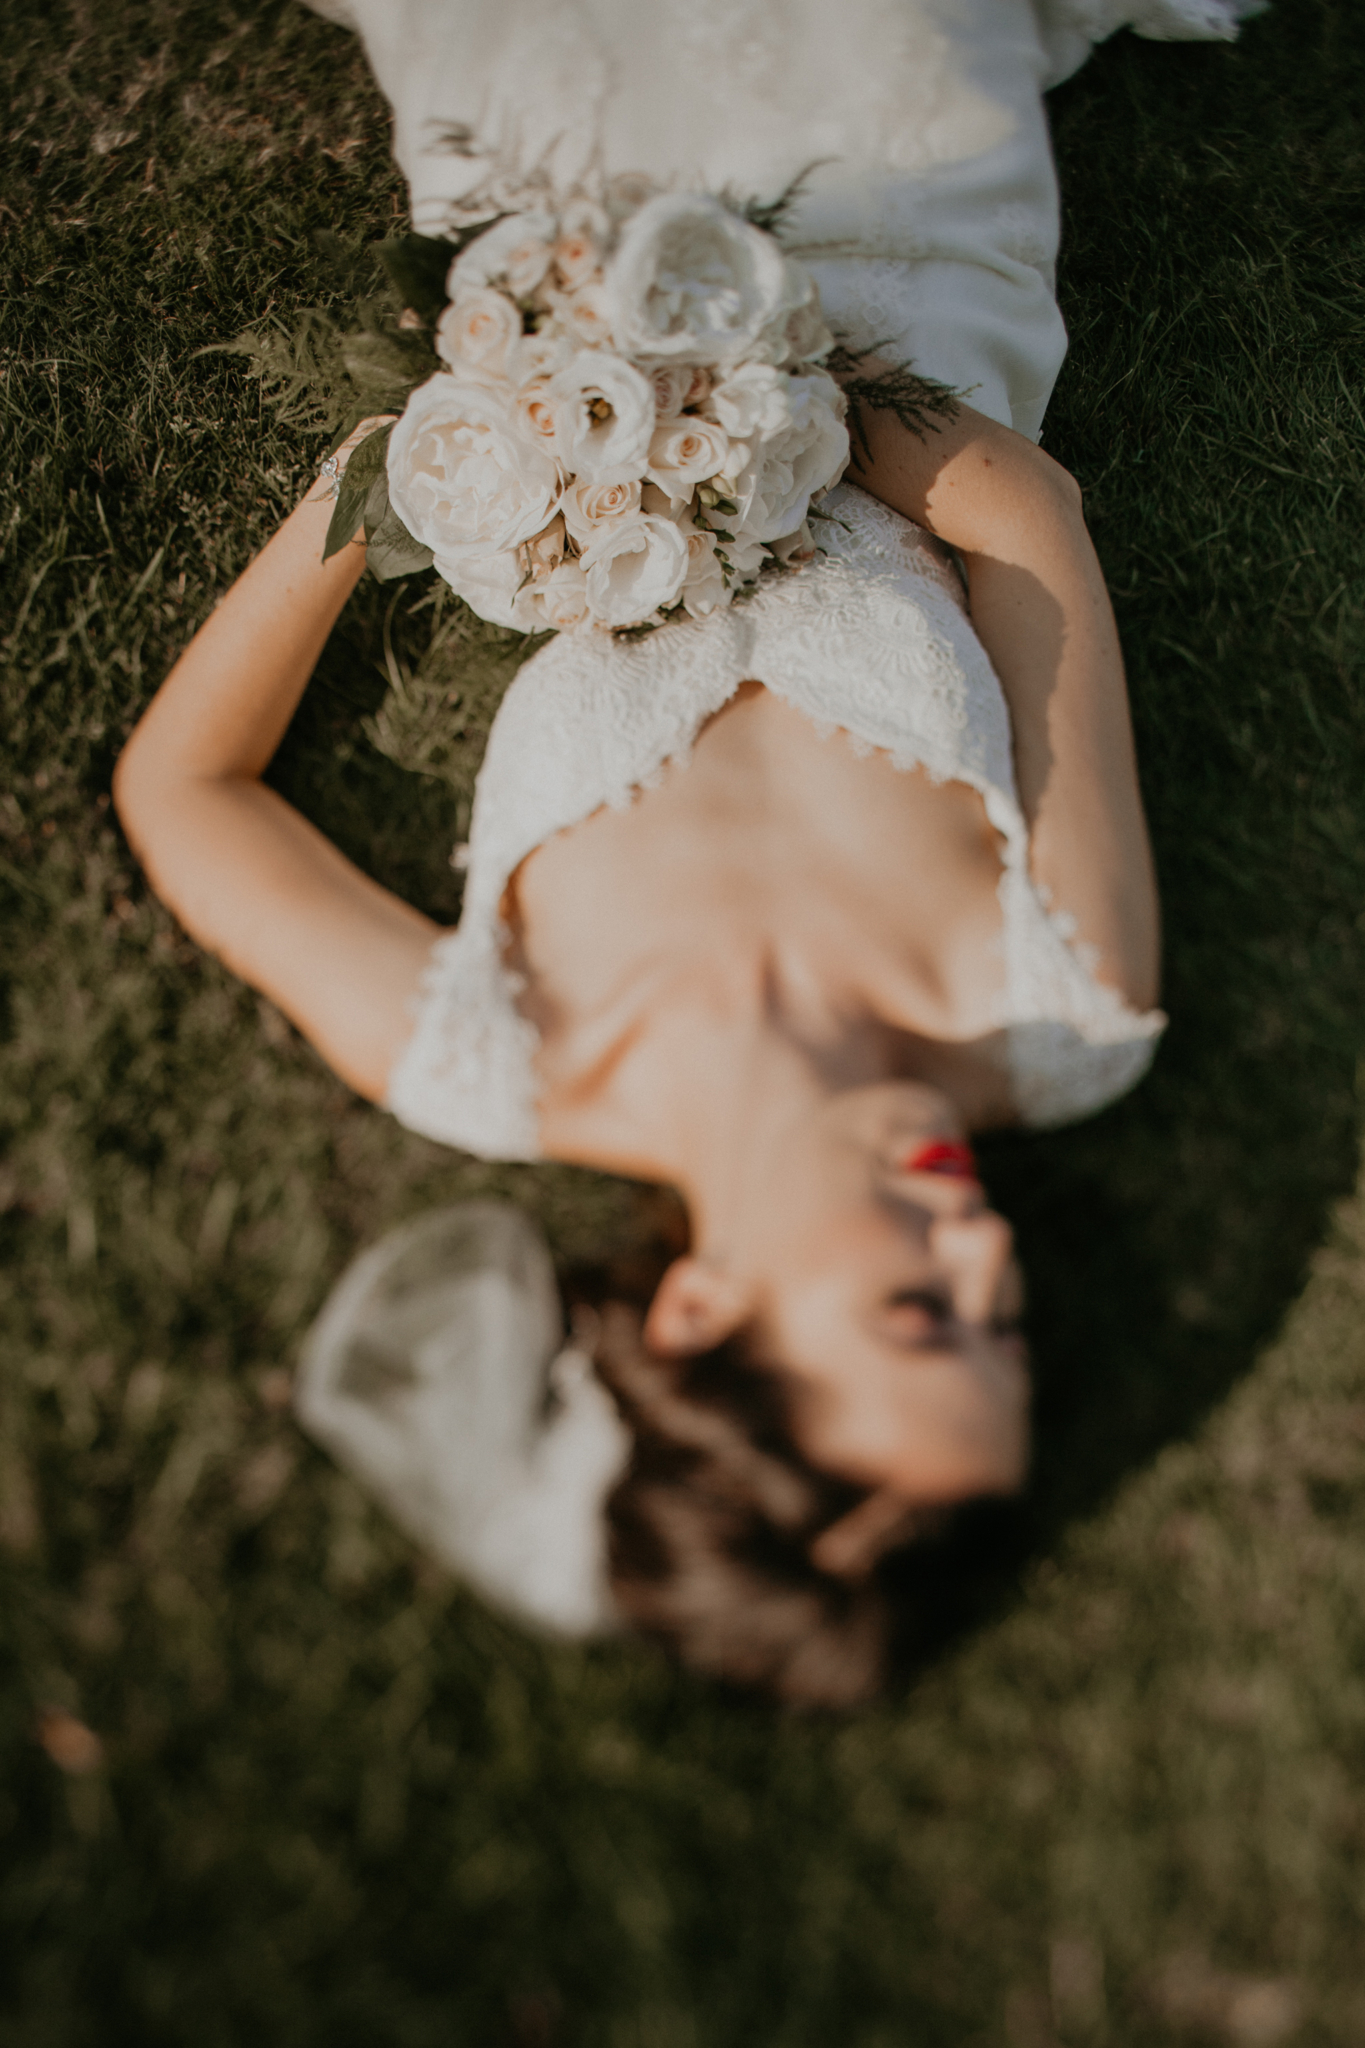 Bride lays down in grass holding bouquet